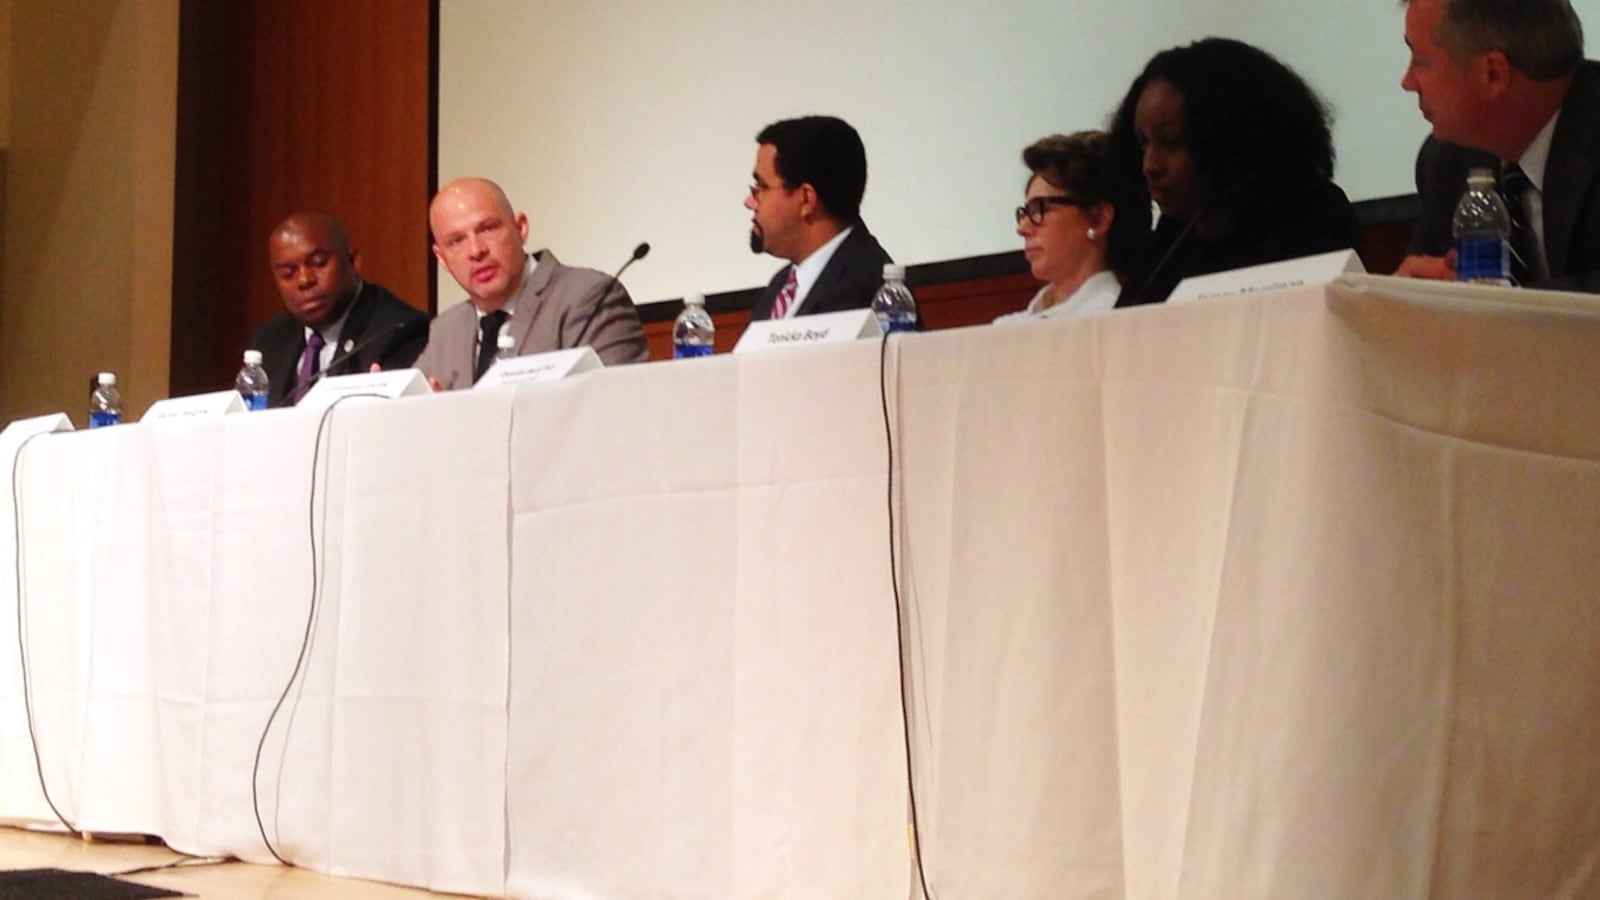 UFT President Michael Mulgrew talks about technology in schools during a panel on education policy issues on Thursday.